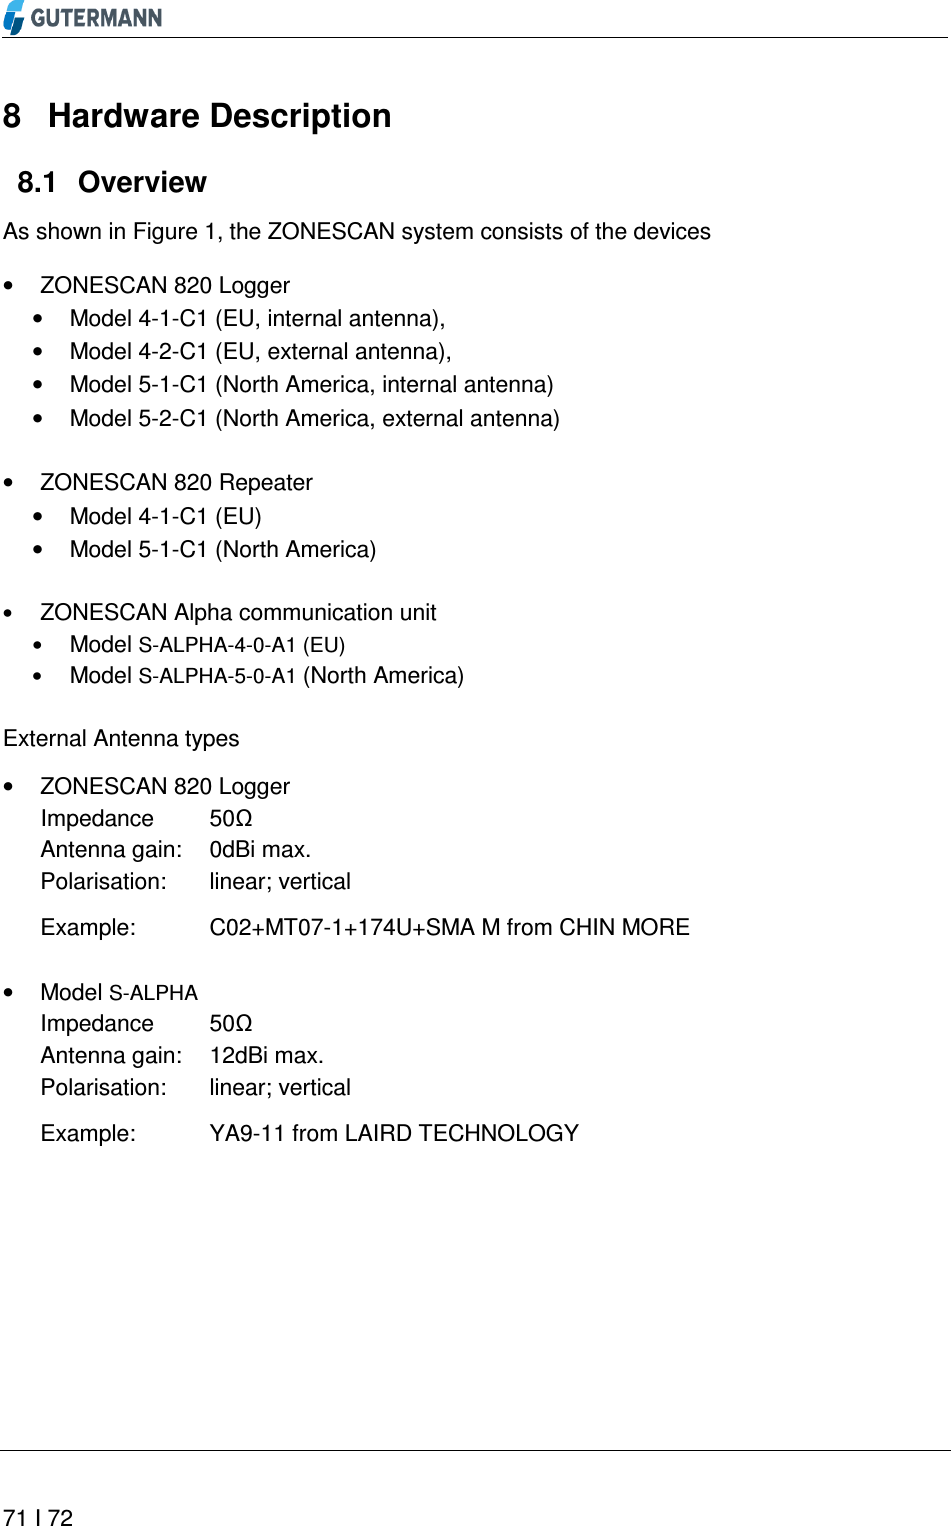       71 I 72  8  Hardware Description   Overview 8.1As shown in Figure 1, the ZONESCAN system consists of the devices •  ZONESCAN 820 Logger  •  Model 4-1-C1 (EU, internal antenna),  •  Model 4-2-C1 (EU, external antenna),  •  Model 5-1-C1 (North America, internal antenna) •  Model 5-2-C1 (North America, external antenna)  •  ZONESCAN 820 Repeater  •  Model 4-1-C1 (EU) •  Model 5-1-C1 (North America)  • ZONESCAN Alpha communication unit • Model S-ALPHA-4-0-A1 (EU) • Model S-ALPHA-5-0-A1 (North America)  External Antenna types  •  ZONESCAN 820 Logger  Impedance   50Ω Antenna gain:  0dBi max. Polarisation:  linear; vertical  Example:  C02+MT07-1+174U+SMA M from CHIN MORE  •  Model S-ALPHA Impedance   50Ω Antenna gain:  12dBi max. Polarisation:  linear; vertical  Example:  YA9-11 from LAIRD TECHNOLOGY    